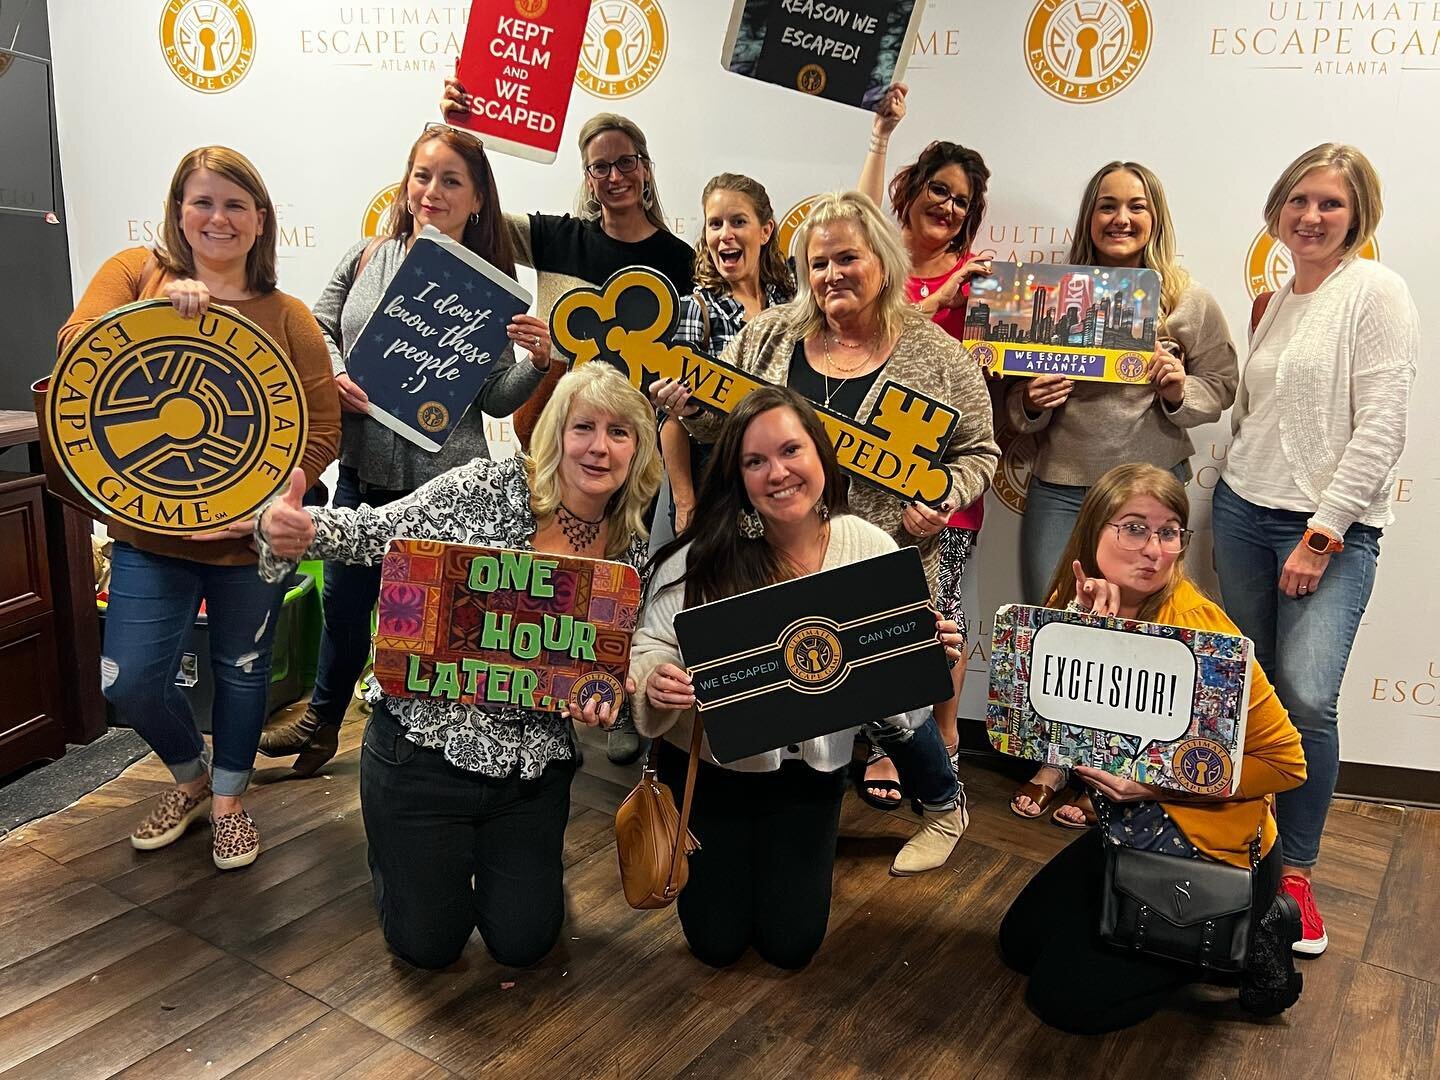 These lovely ladies came in too clutch with the ultimate escape with 17 seconds left!! Yeaaaaa!!!! 🔥👏☺️👌🎉

#weescaped #atlanta #uegatl #masterpuzzlers #wedidit #funthingstodo #ultimateescapegameatlanta #teacherlife🍎